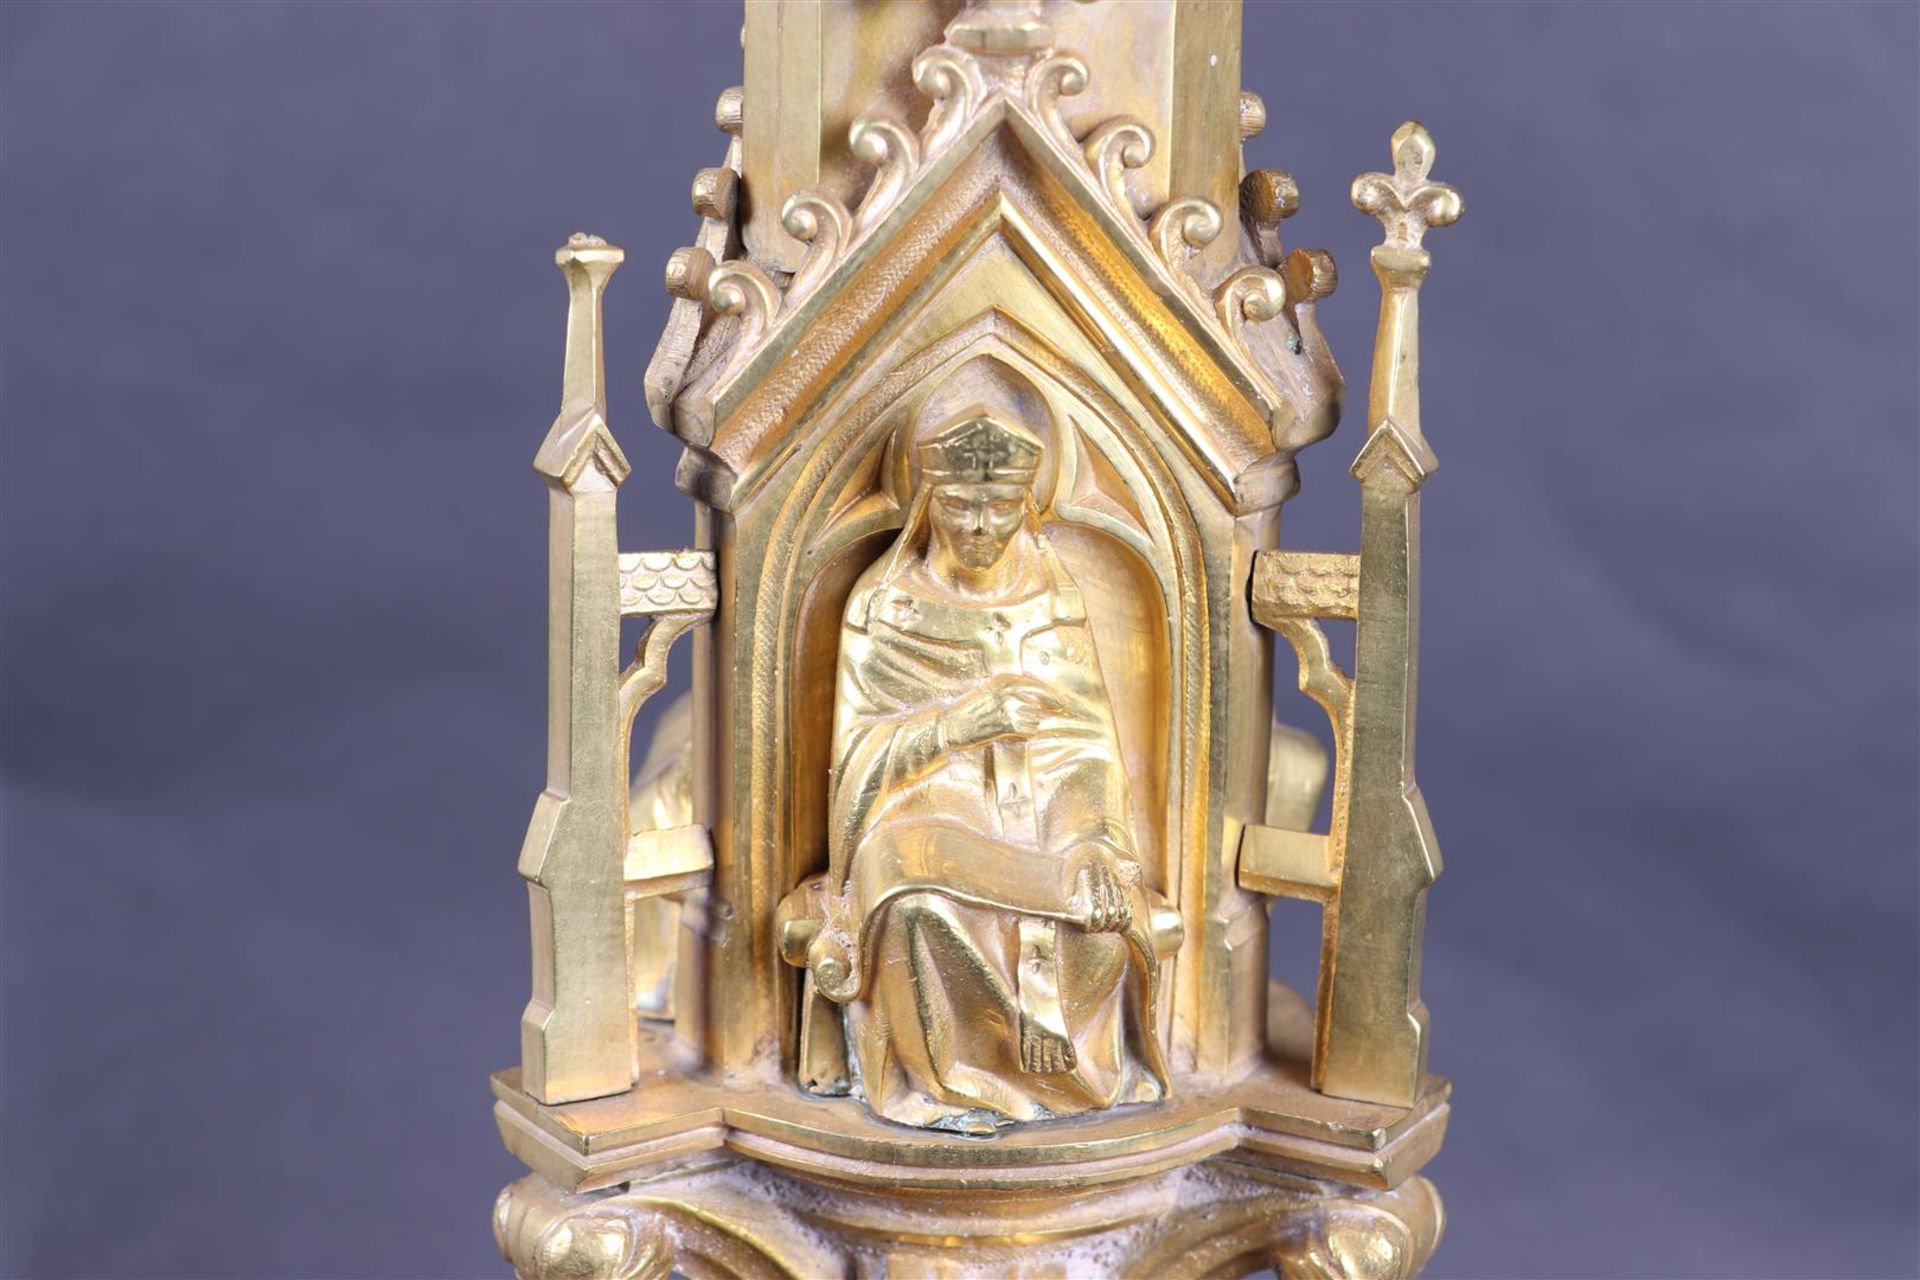 Neo-Gothic Ormolu Altar Candlestick with Images of Church Fathers (Approx. 1880) - Image 2 of 6